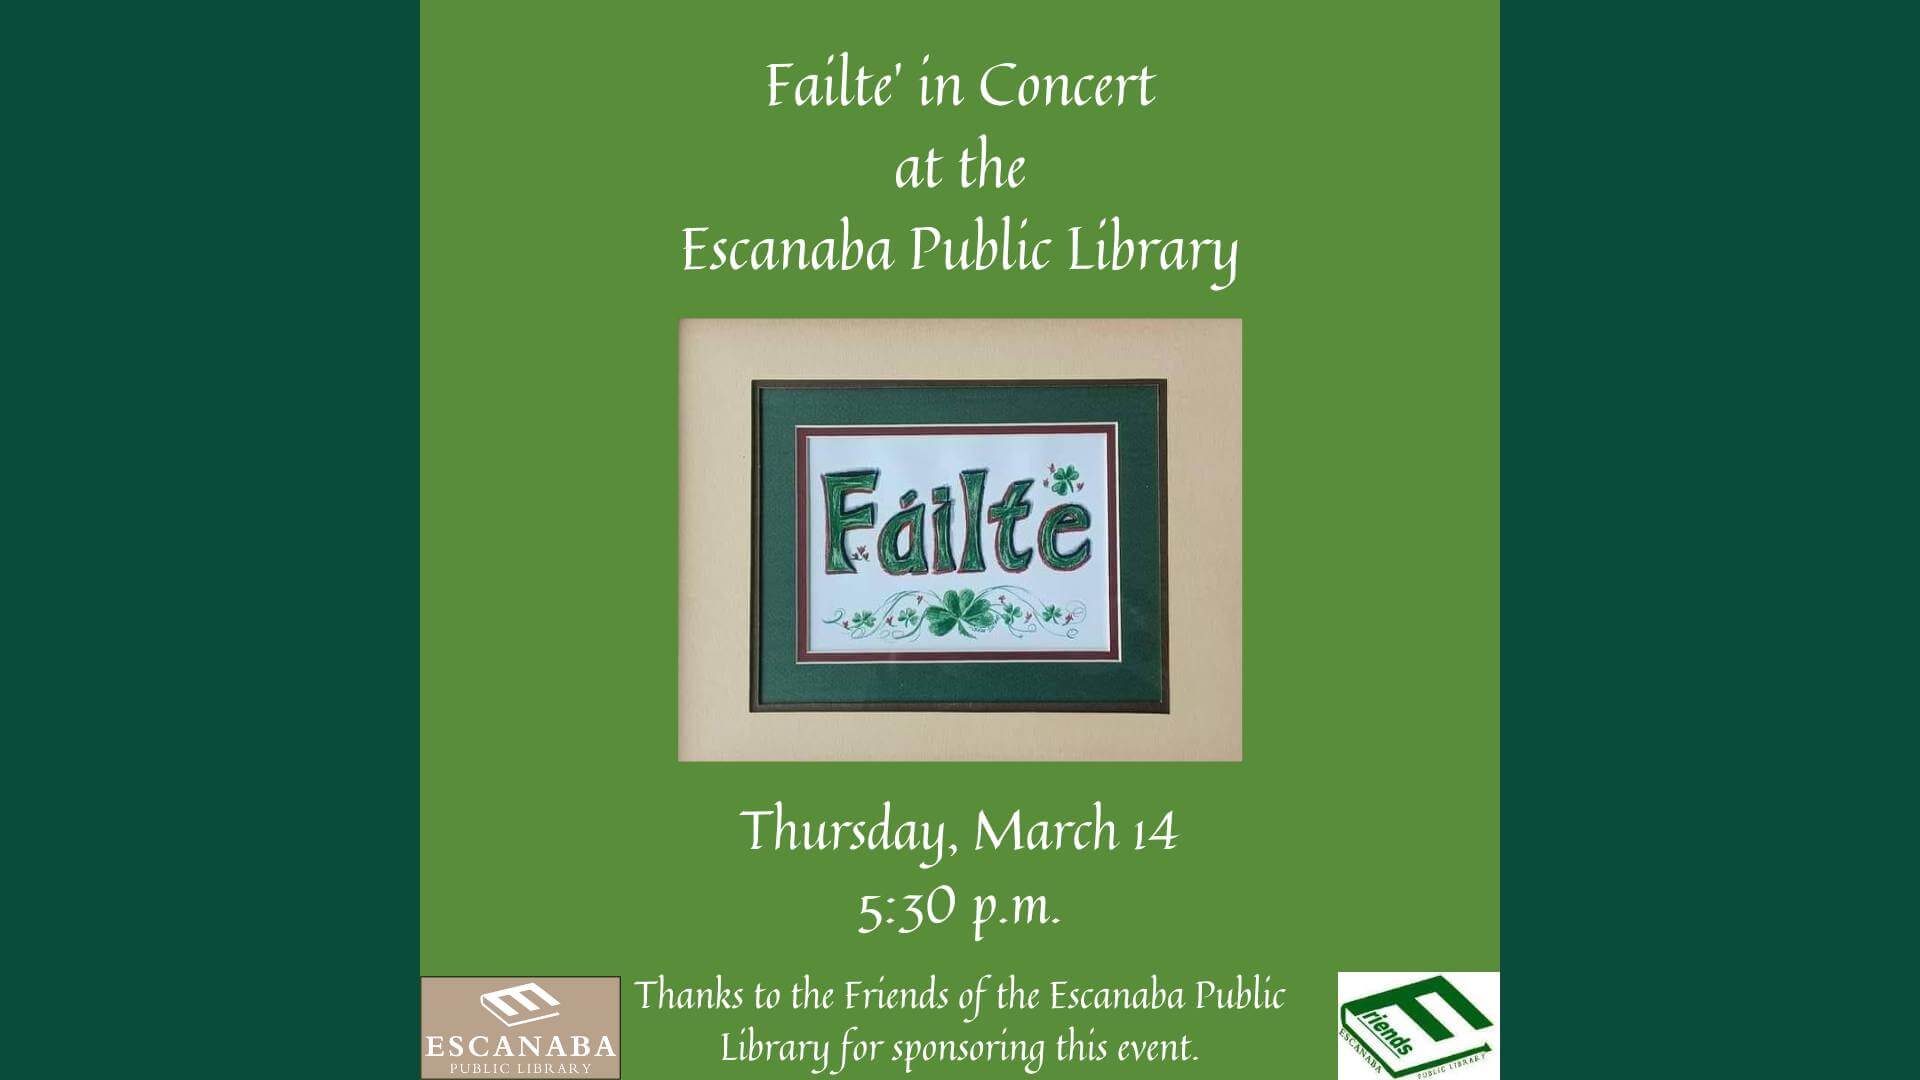 Fáilte in Concert at the Escanaba Public Library. Thursday, March 14th at 5;30 P.M. Thanks to the Friends of the Escanaba Public Library for sponsoring this event.